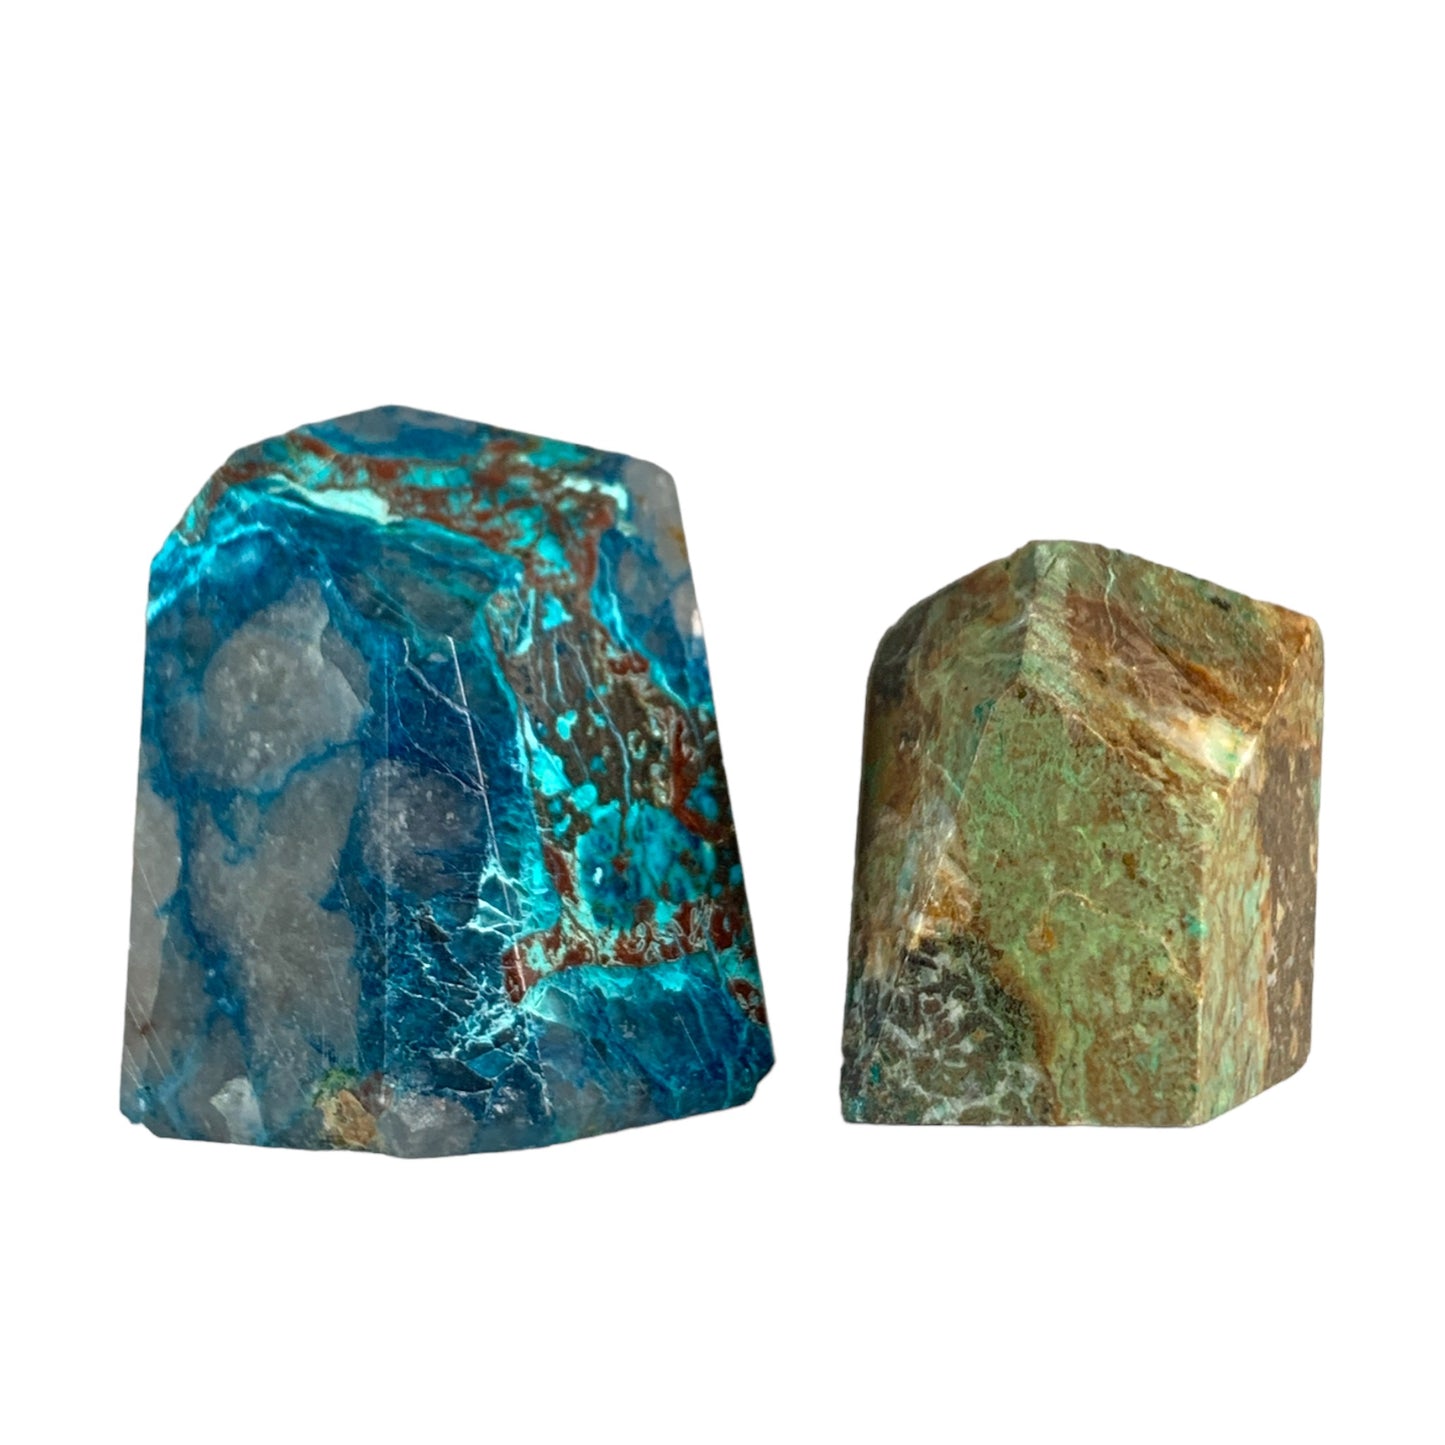 Chrysocolla Chunky Points - 45-65mm (8-10pcs per kg) - Price per gram - NEW1020 - Polished Points